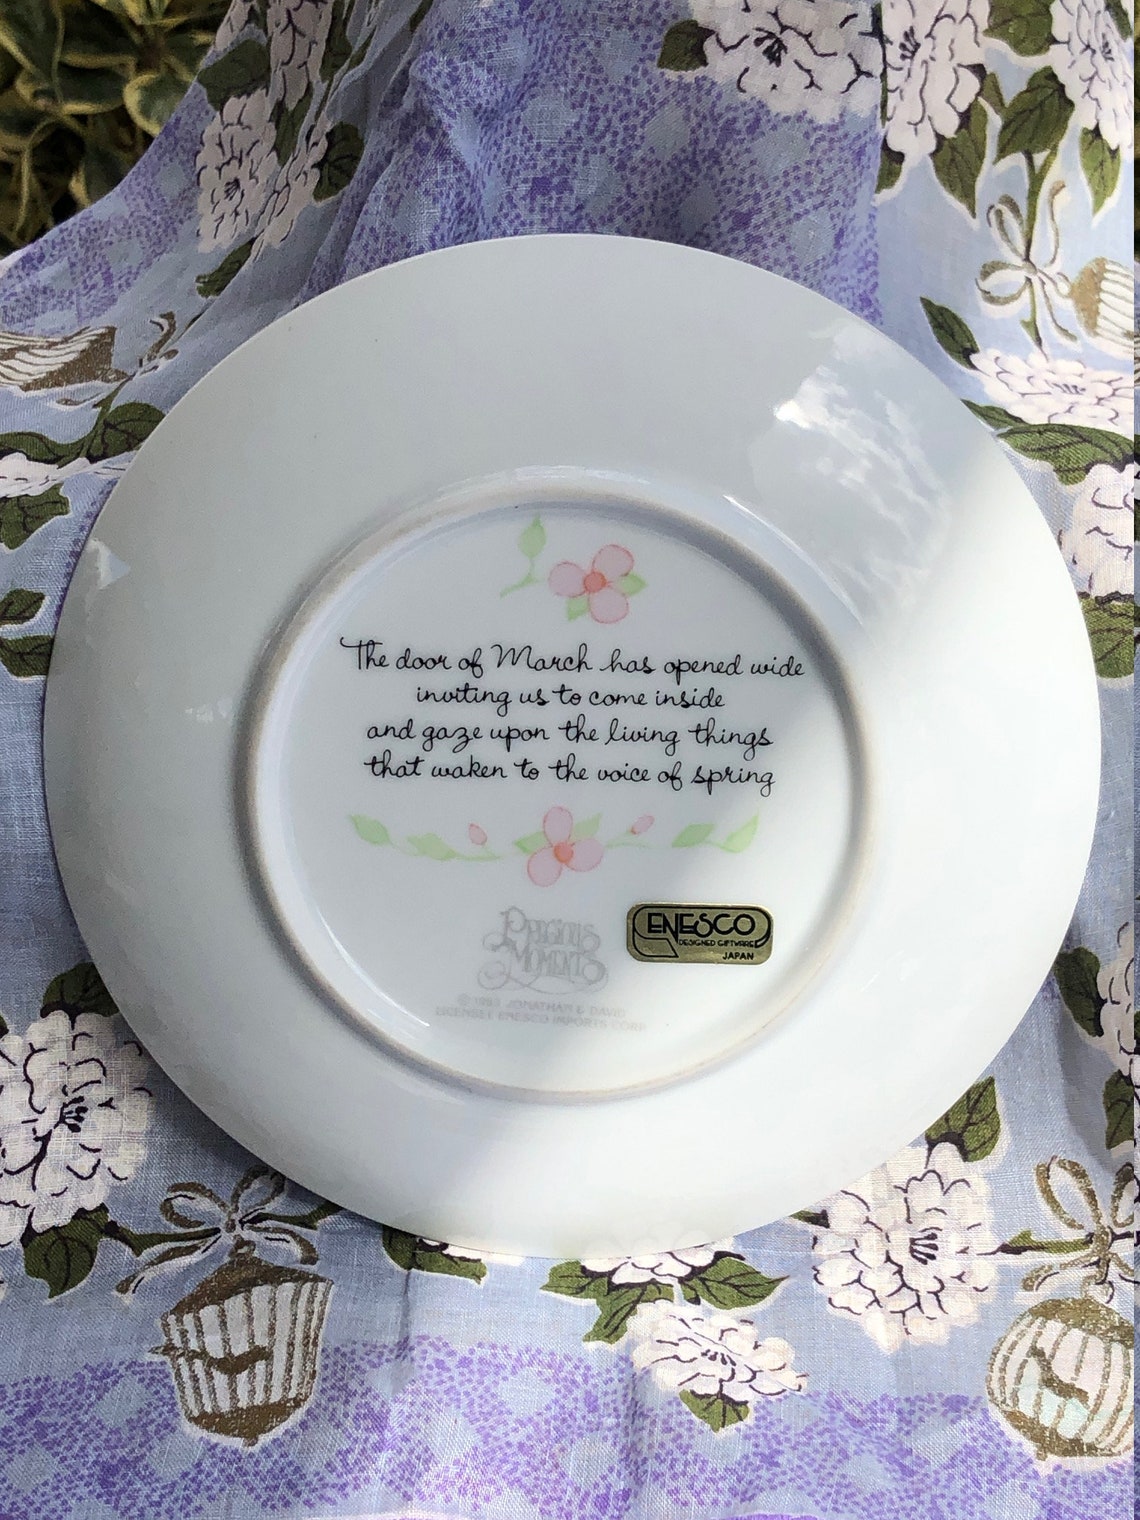 Precious Moments March Plate by Enesco White Porcelain Plate - Etsy